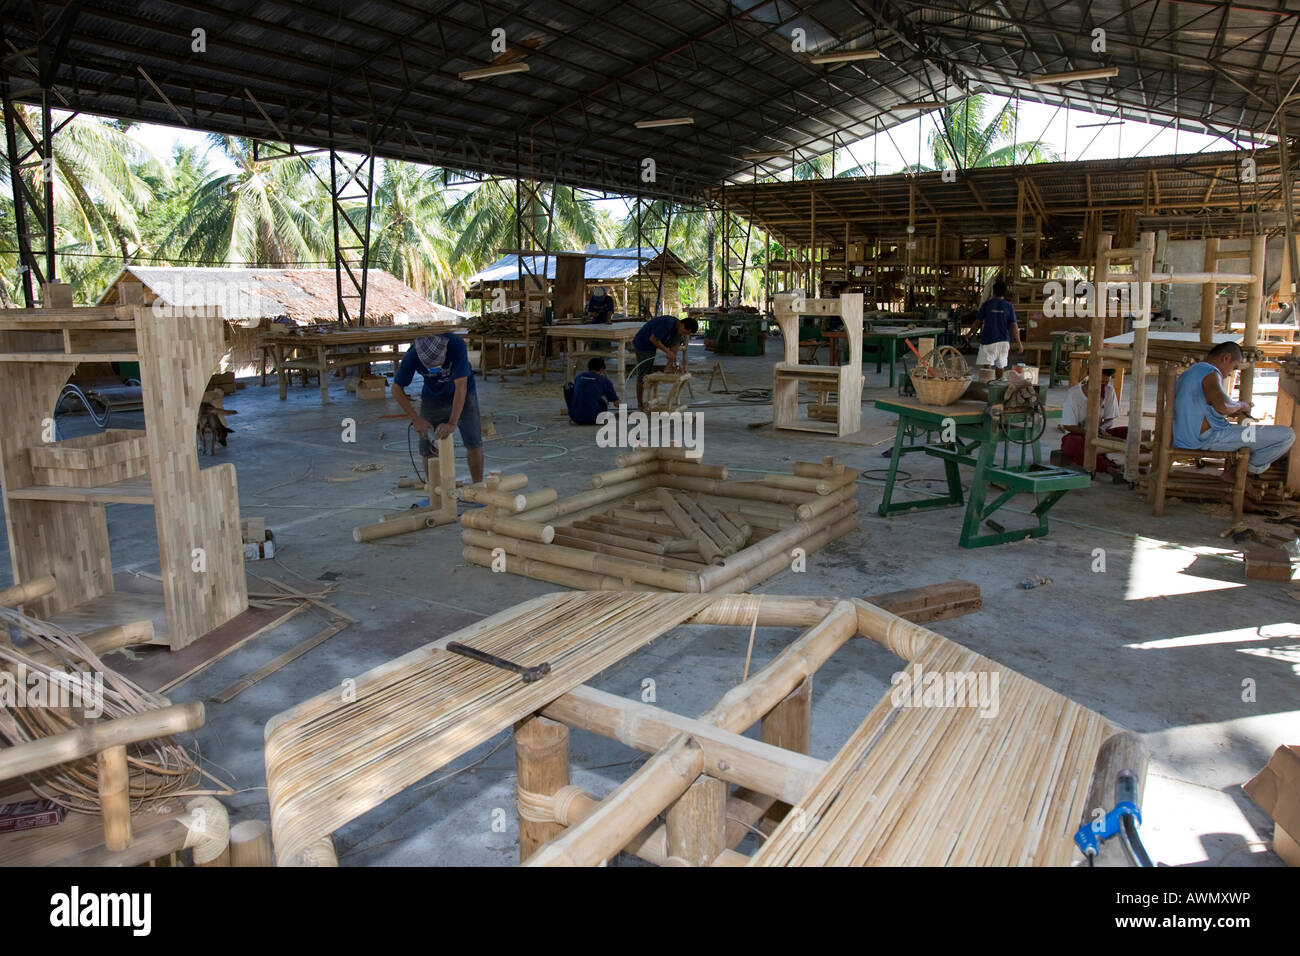 Bamboo being processed at a furniture factory in Negros, the Philippines, Asia Stock Photo